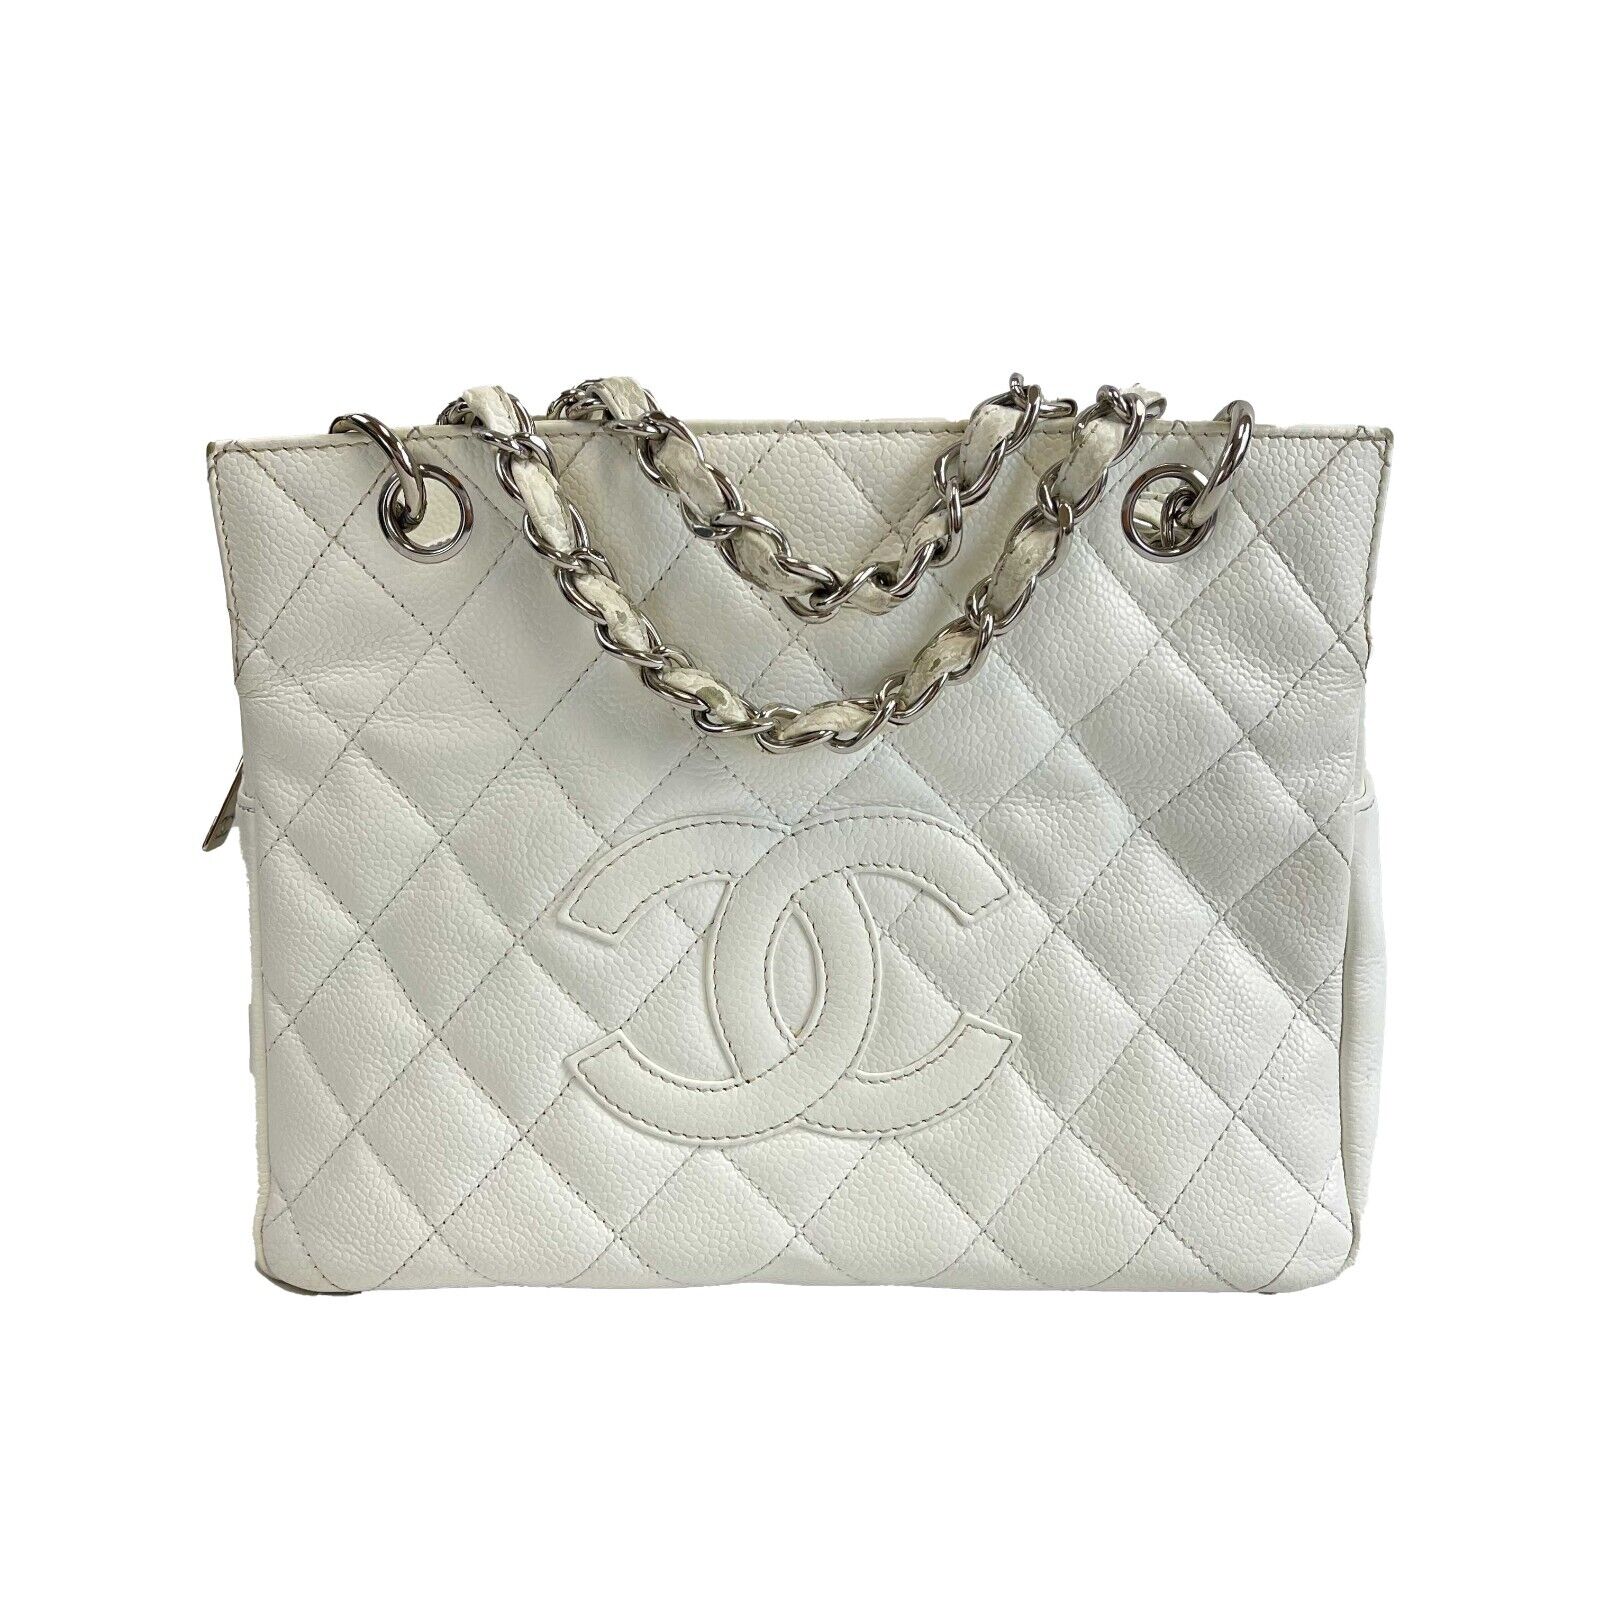 CHANEL - Petite Timeless Tote Caviar Quilted CC Medium Tote